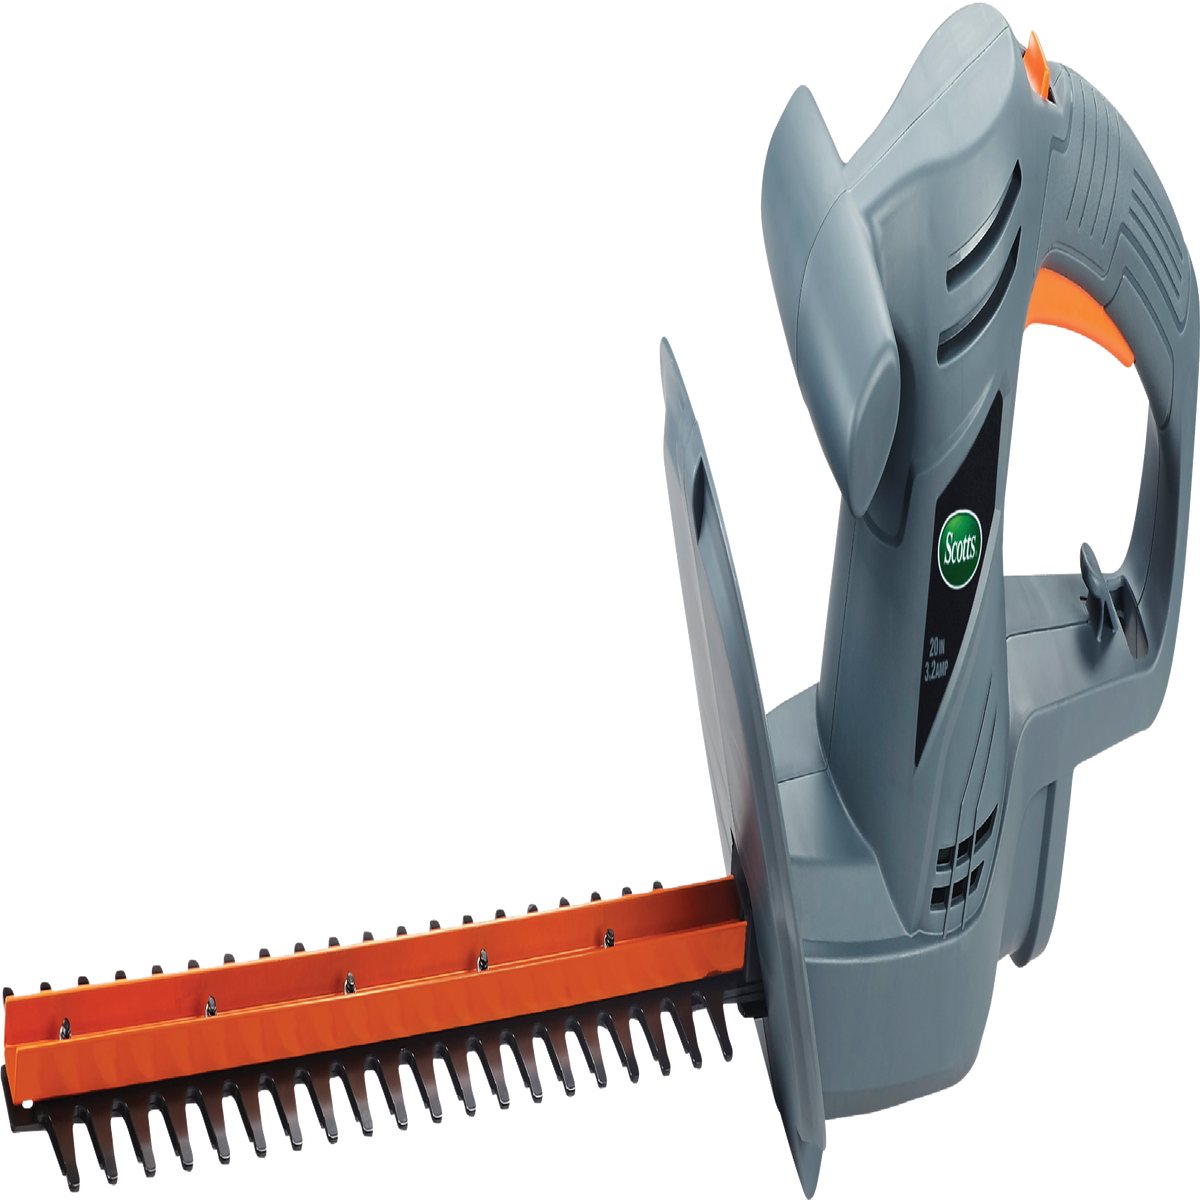 Corded Electric Hedge Trimmer